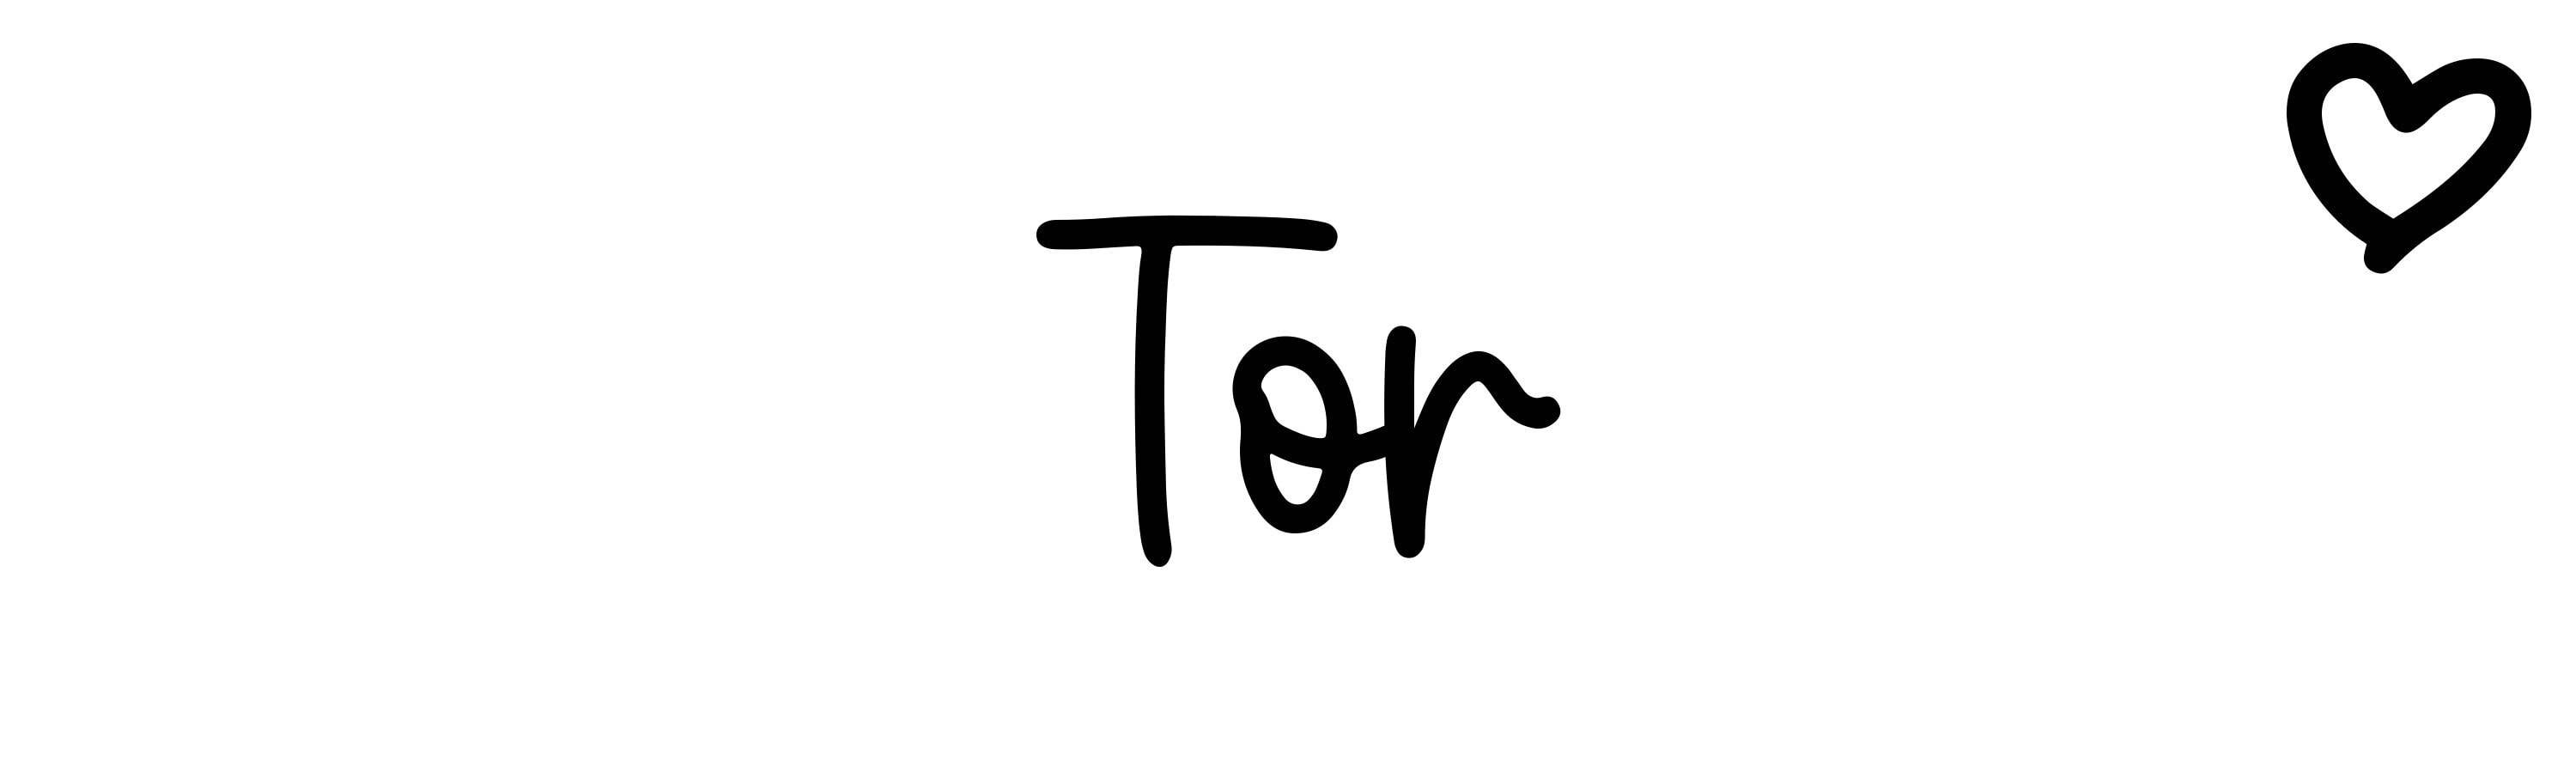 tor meaning in english